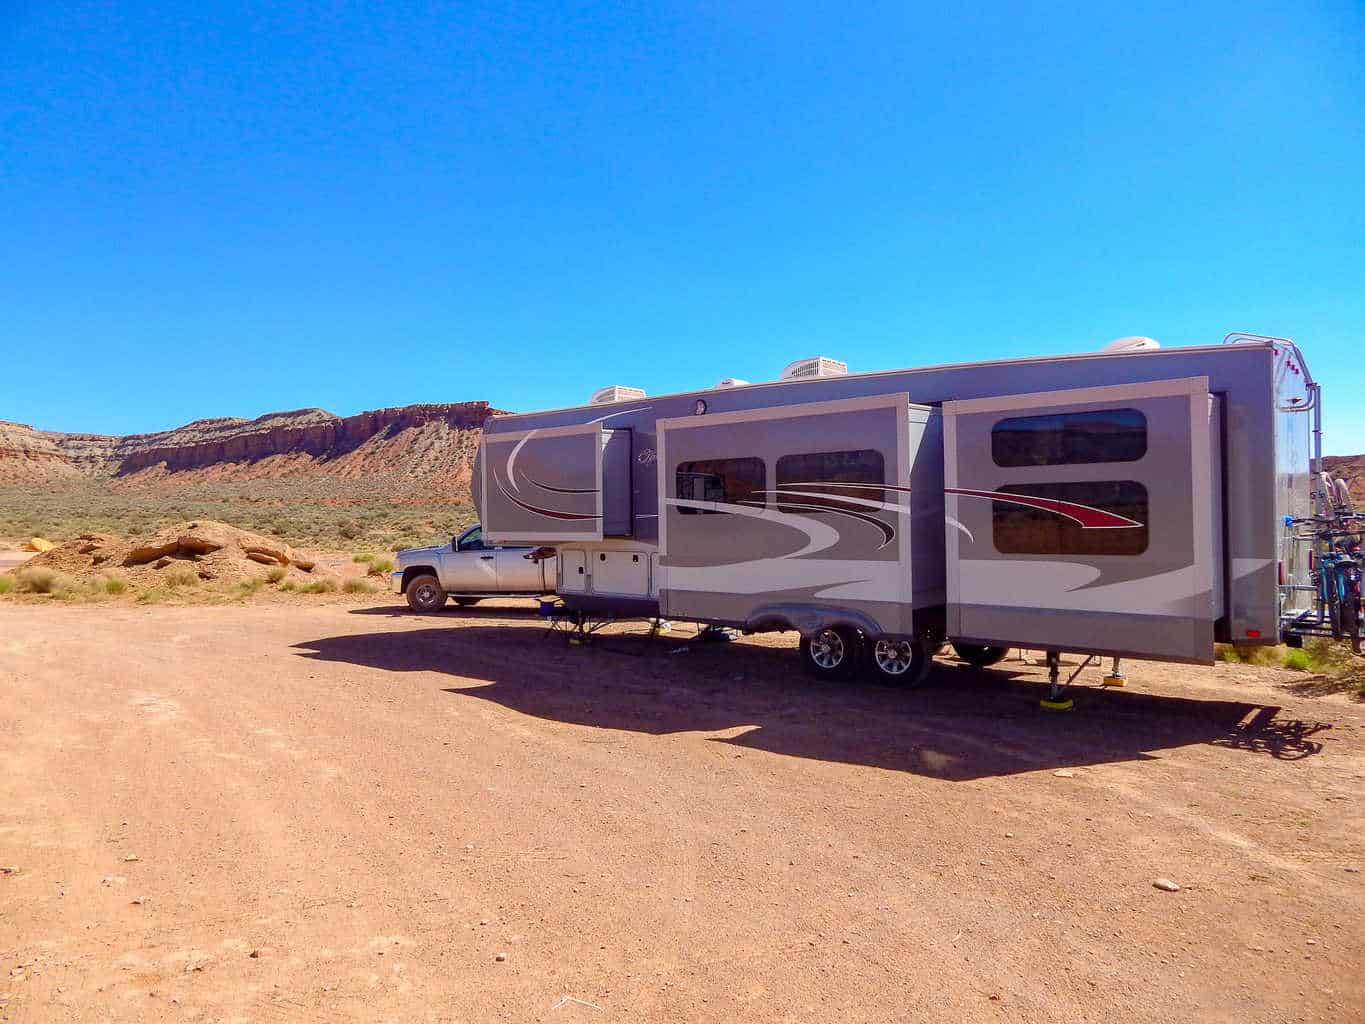 Get Started Boondocking and Save a Fortune on Campground Fees